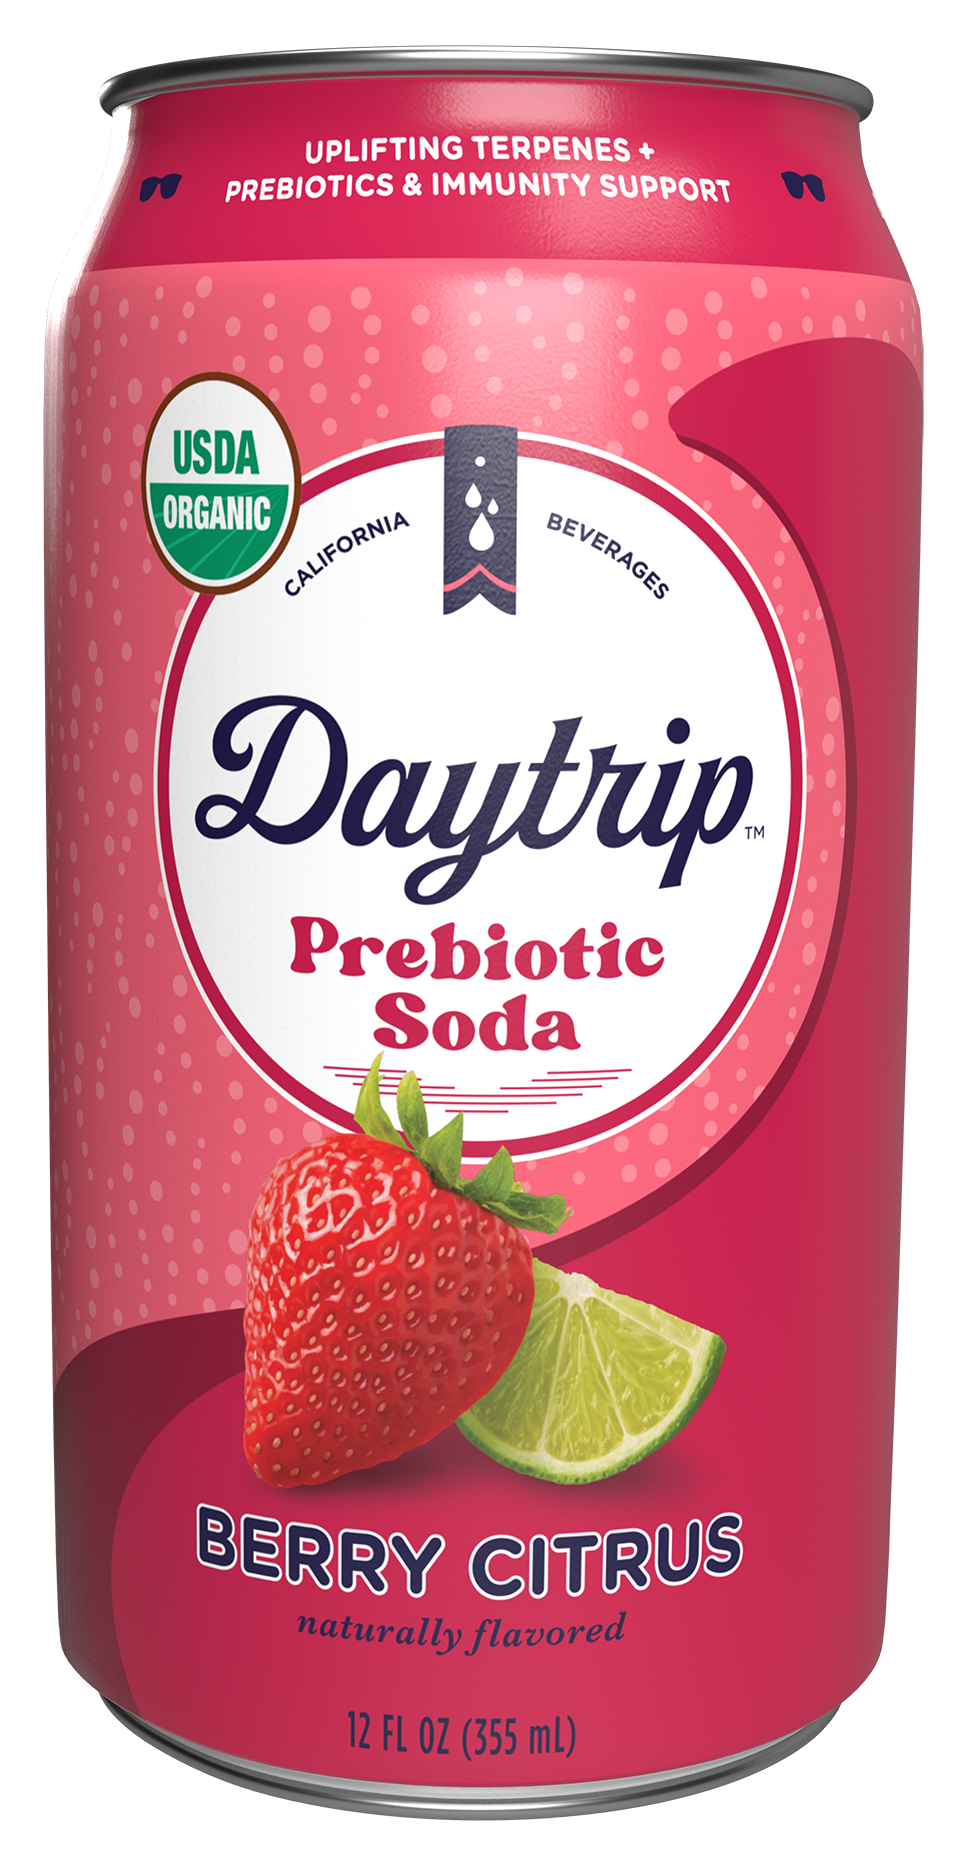 Can render of Daytrip berry citrus prebiotic soda on a white background.